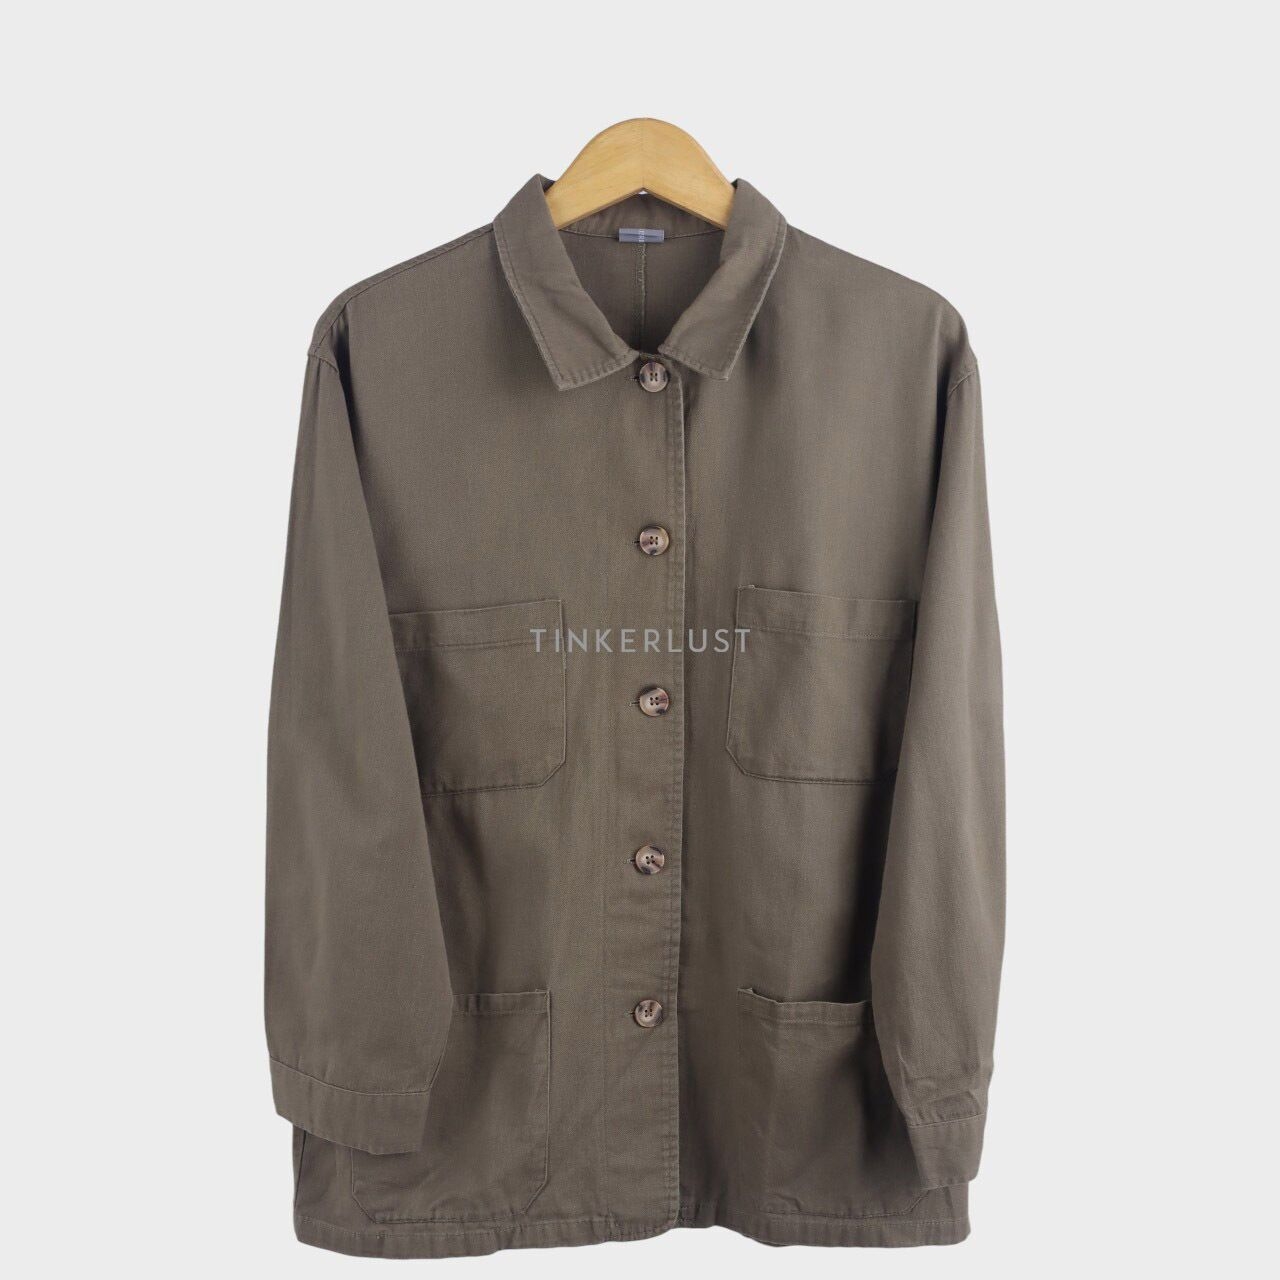 This is April Olive Shirt